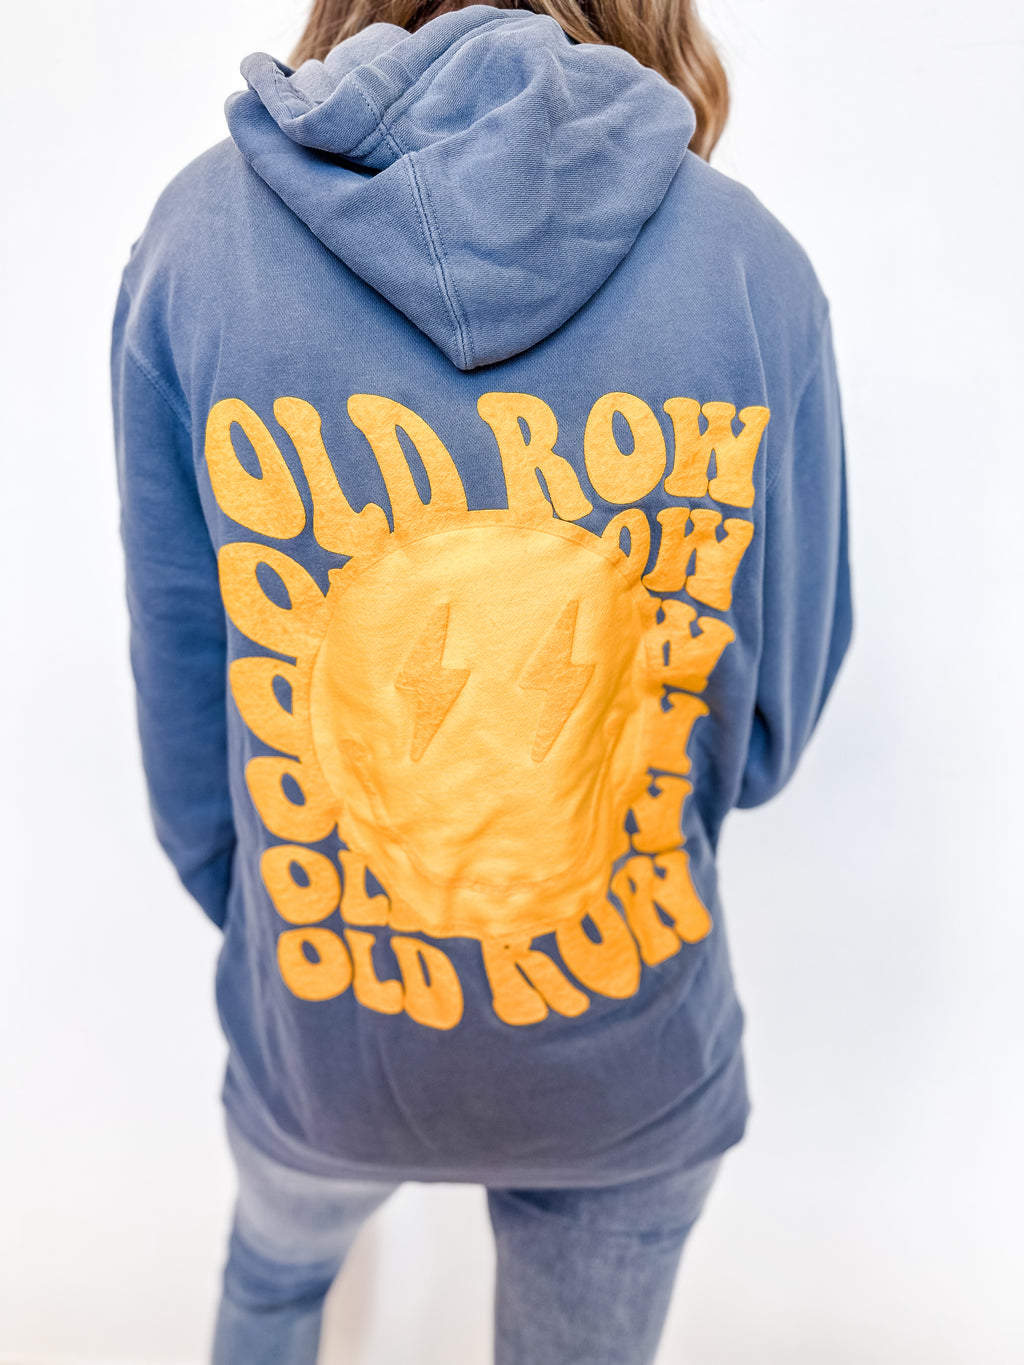 Old Row Smiley Face Hoodie